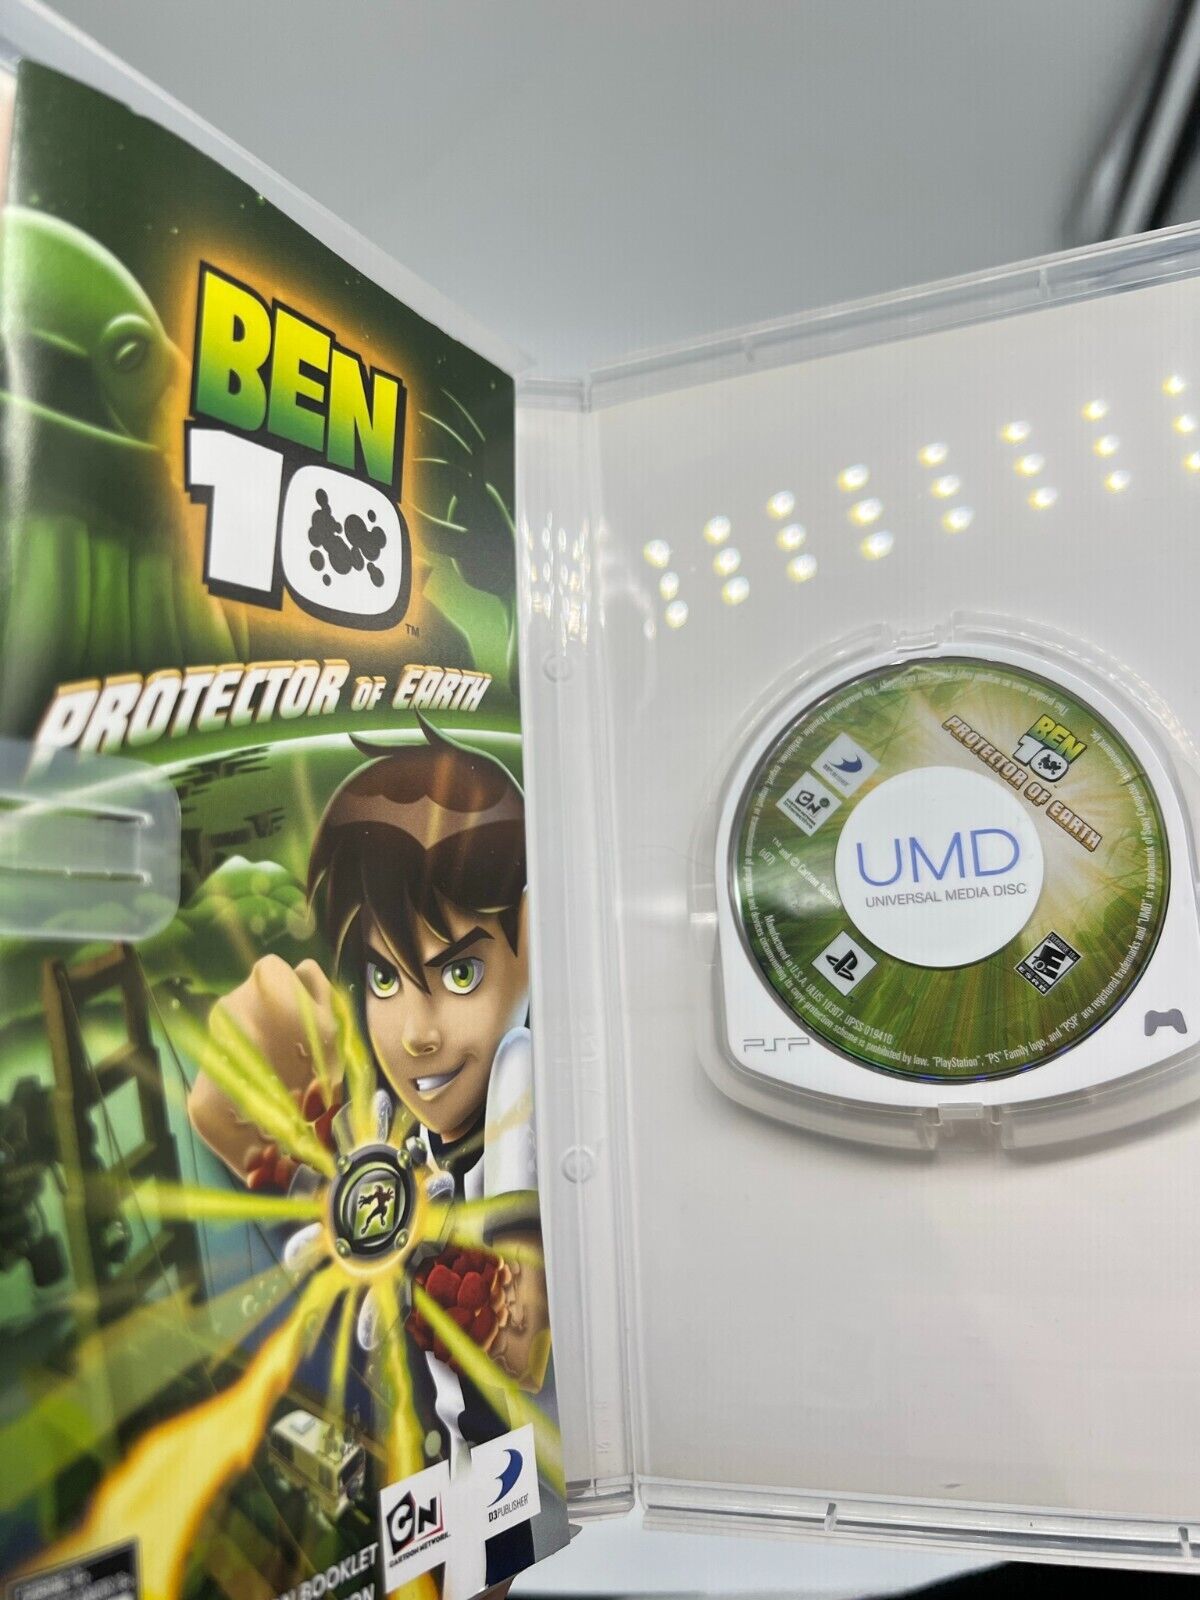 Ben 10: Protector of Earth (Sony PSP, 2007)